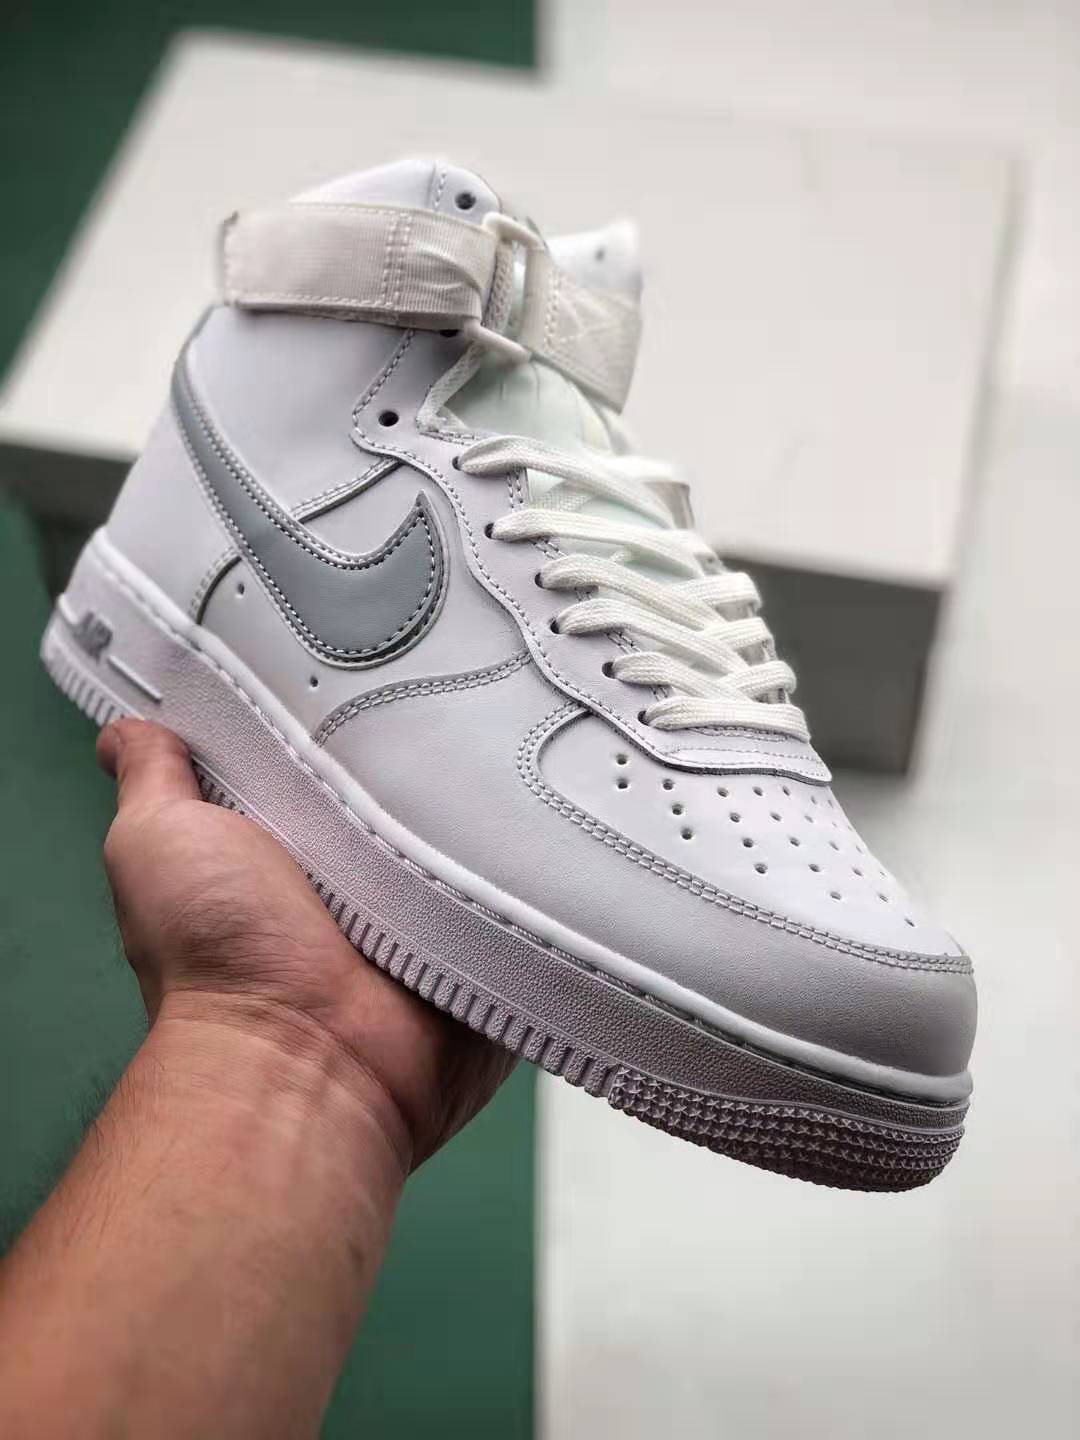 Nike Air Force 1 High '07 'White Wolf Grey' AT4141-100 - Stylish and Classic Sneakers